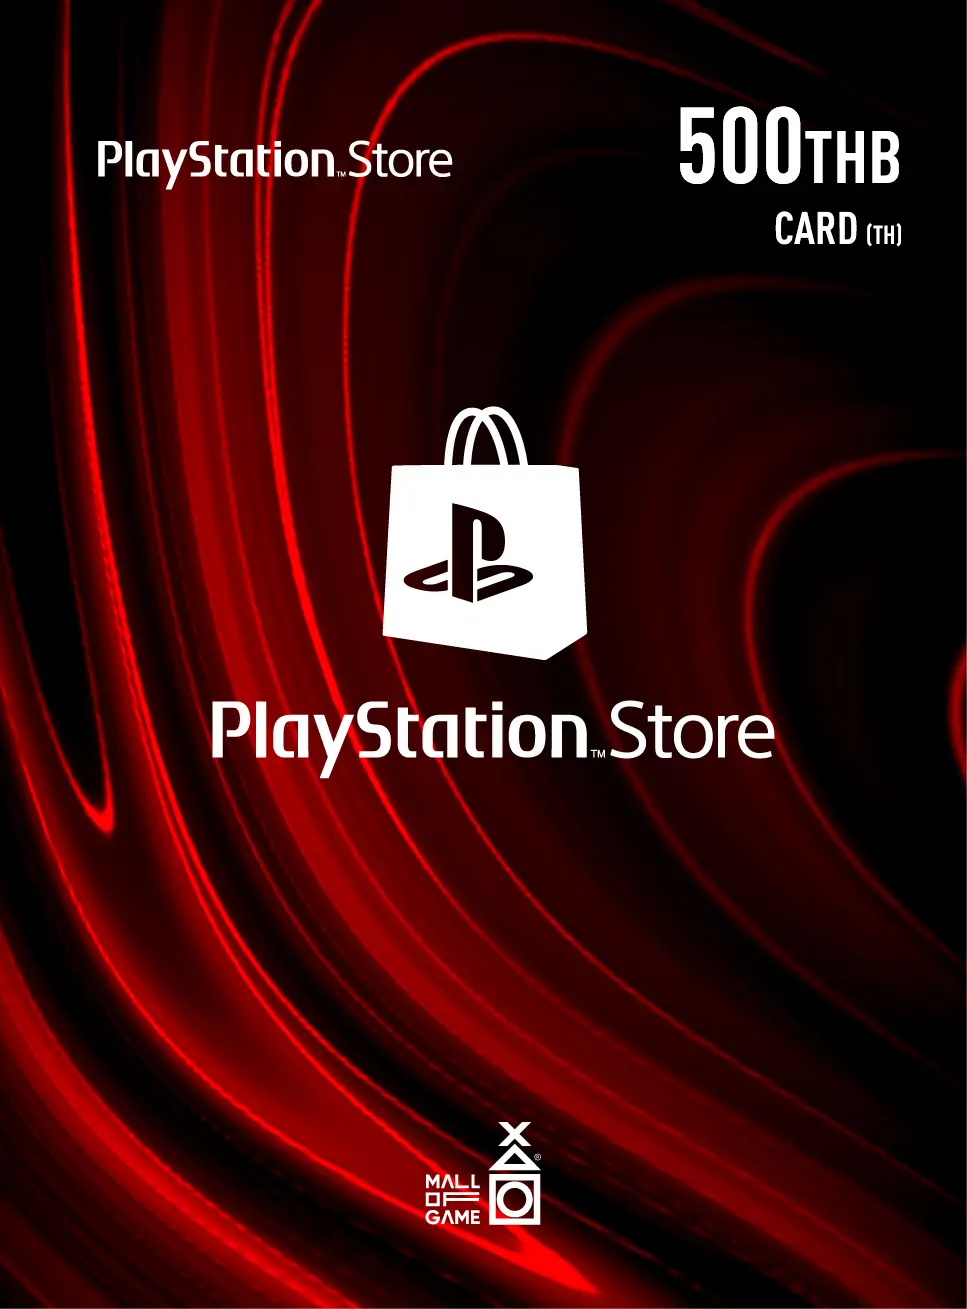 PlayStation™Store THB500 Gift Cards (TH)